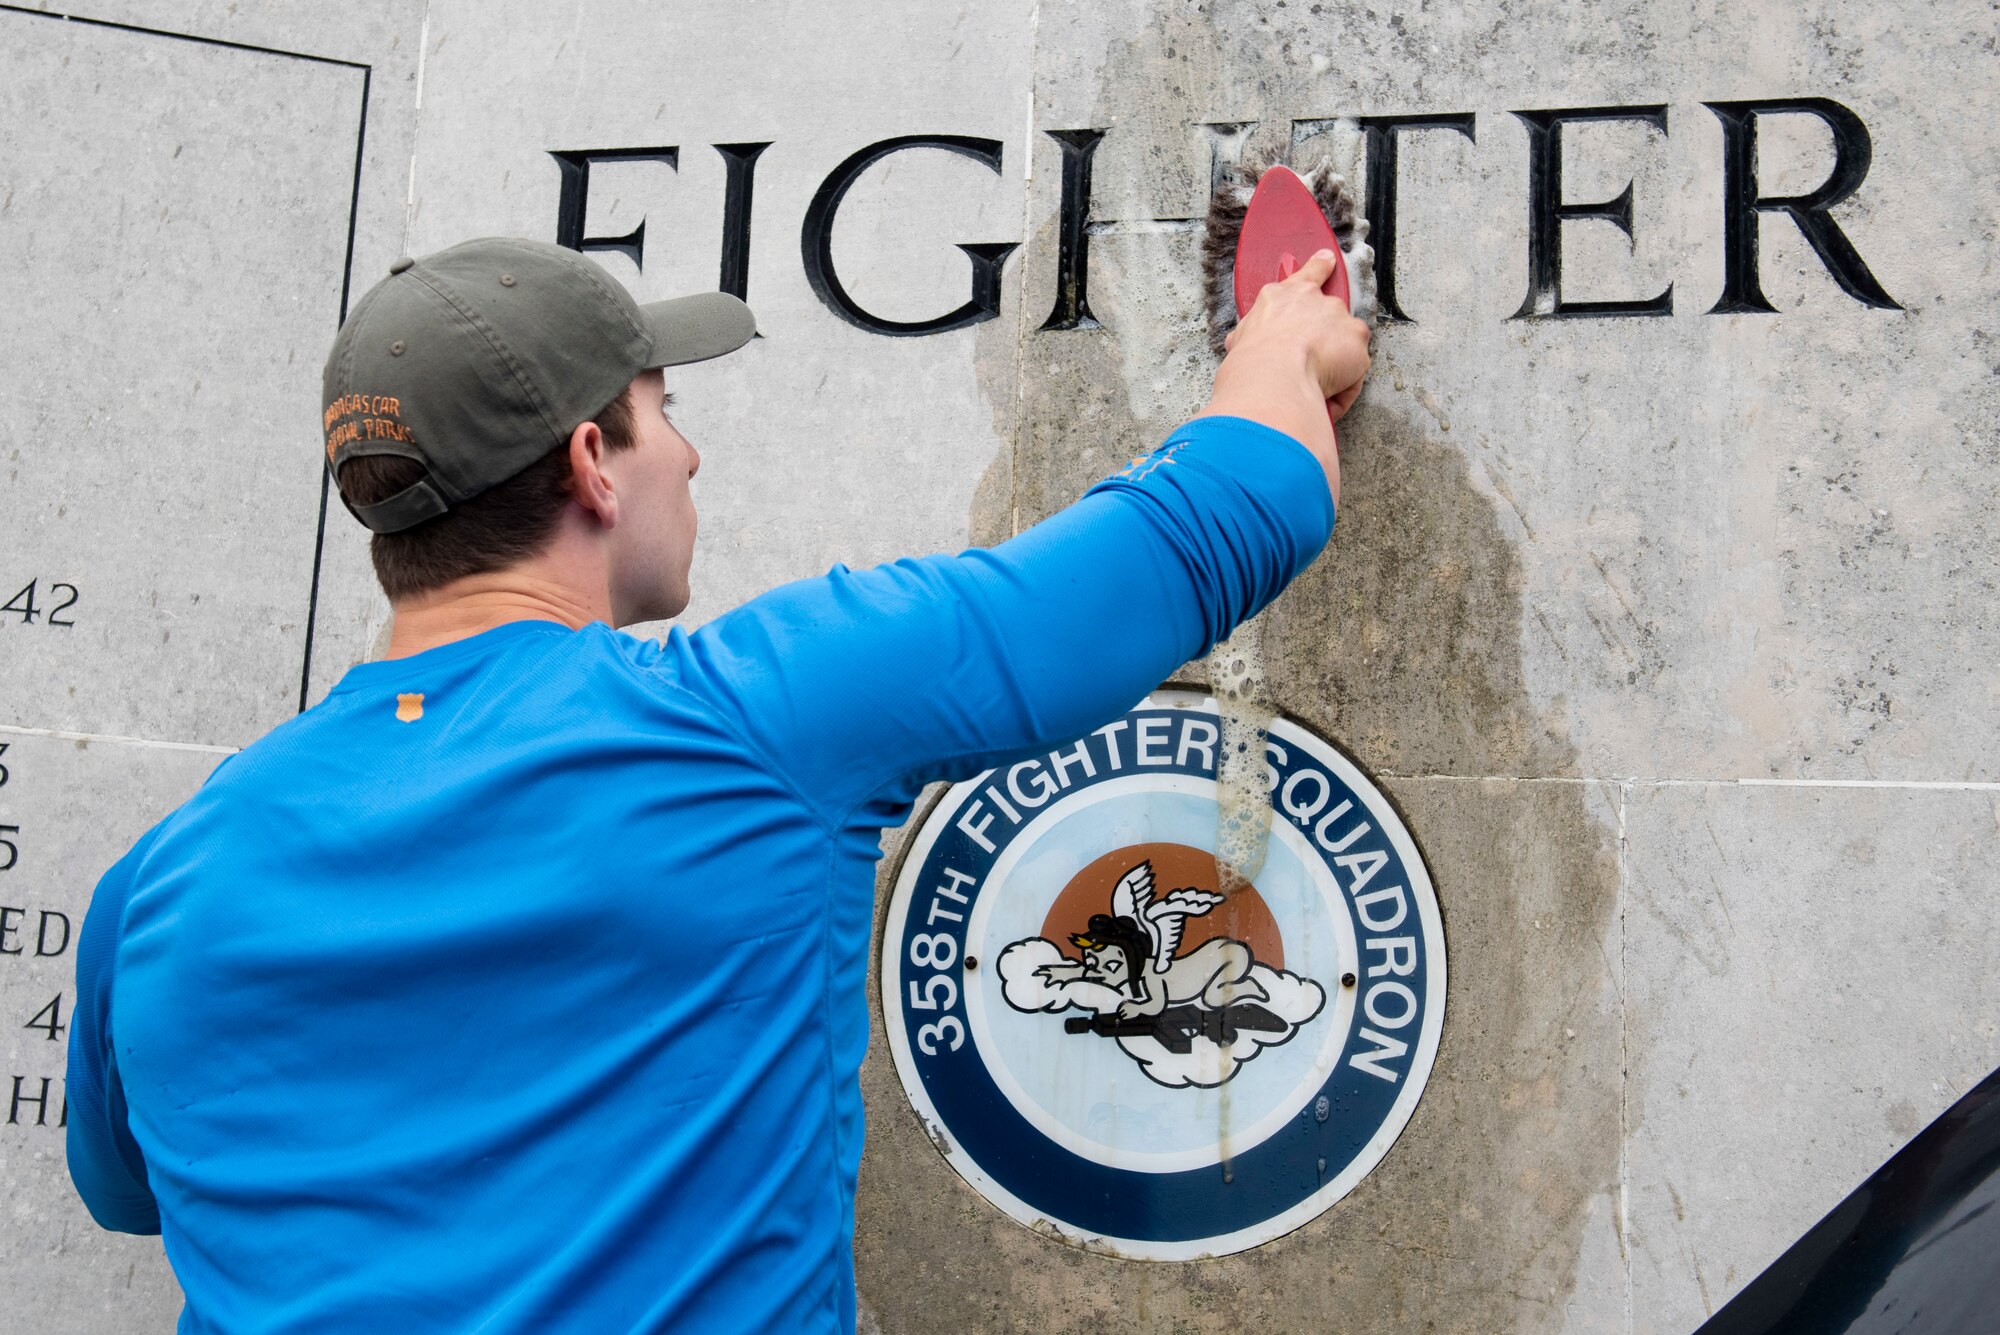 U.S. Navy Petty Officer 2nd Class Sebastian Botero, U.S. Africa Command Directorate for Intelligence at RAF Molesworth technician, scrubs the 355th Fighter Group Steeple Morden Memorial in Steeple Morden, England, during Operation TORCH-2020 memorial cleanup August 15, 2020. U.S. Africa Command Directorate for Intelligence at RAF Molesworth partnered with the American Battle Monuments Commission to host Operation TORCH-2020, where over 50 military members and their families, U.K. nationals and Boy Scout Troop #245, cleaned six WWII memorial sites to preserve American service member legacies and promote an appreciation of past American heroes among present-day USAFRICOM workforce and families. (U.S. Air Force Photo by Airman 1st Class Jennifer Zima)